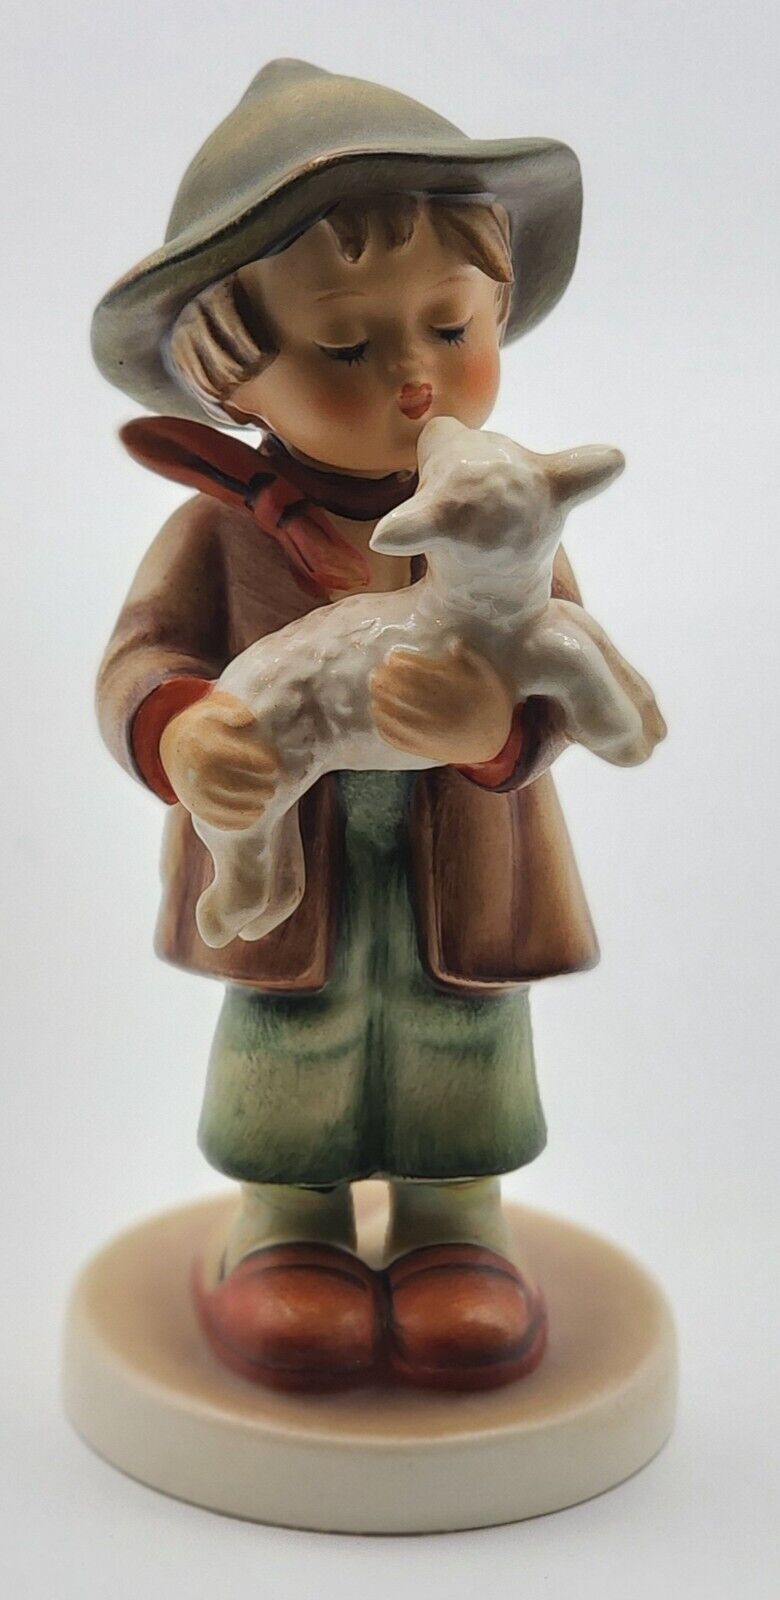 VTG M I Hummel Goebel The Lost Sheep 68 5.5 in Tall Boy holding a small sheep